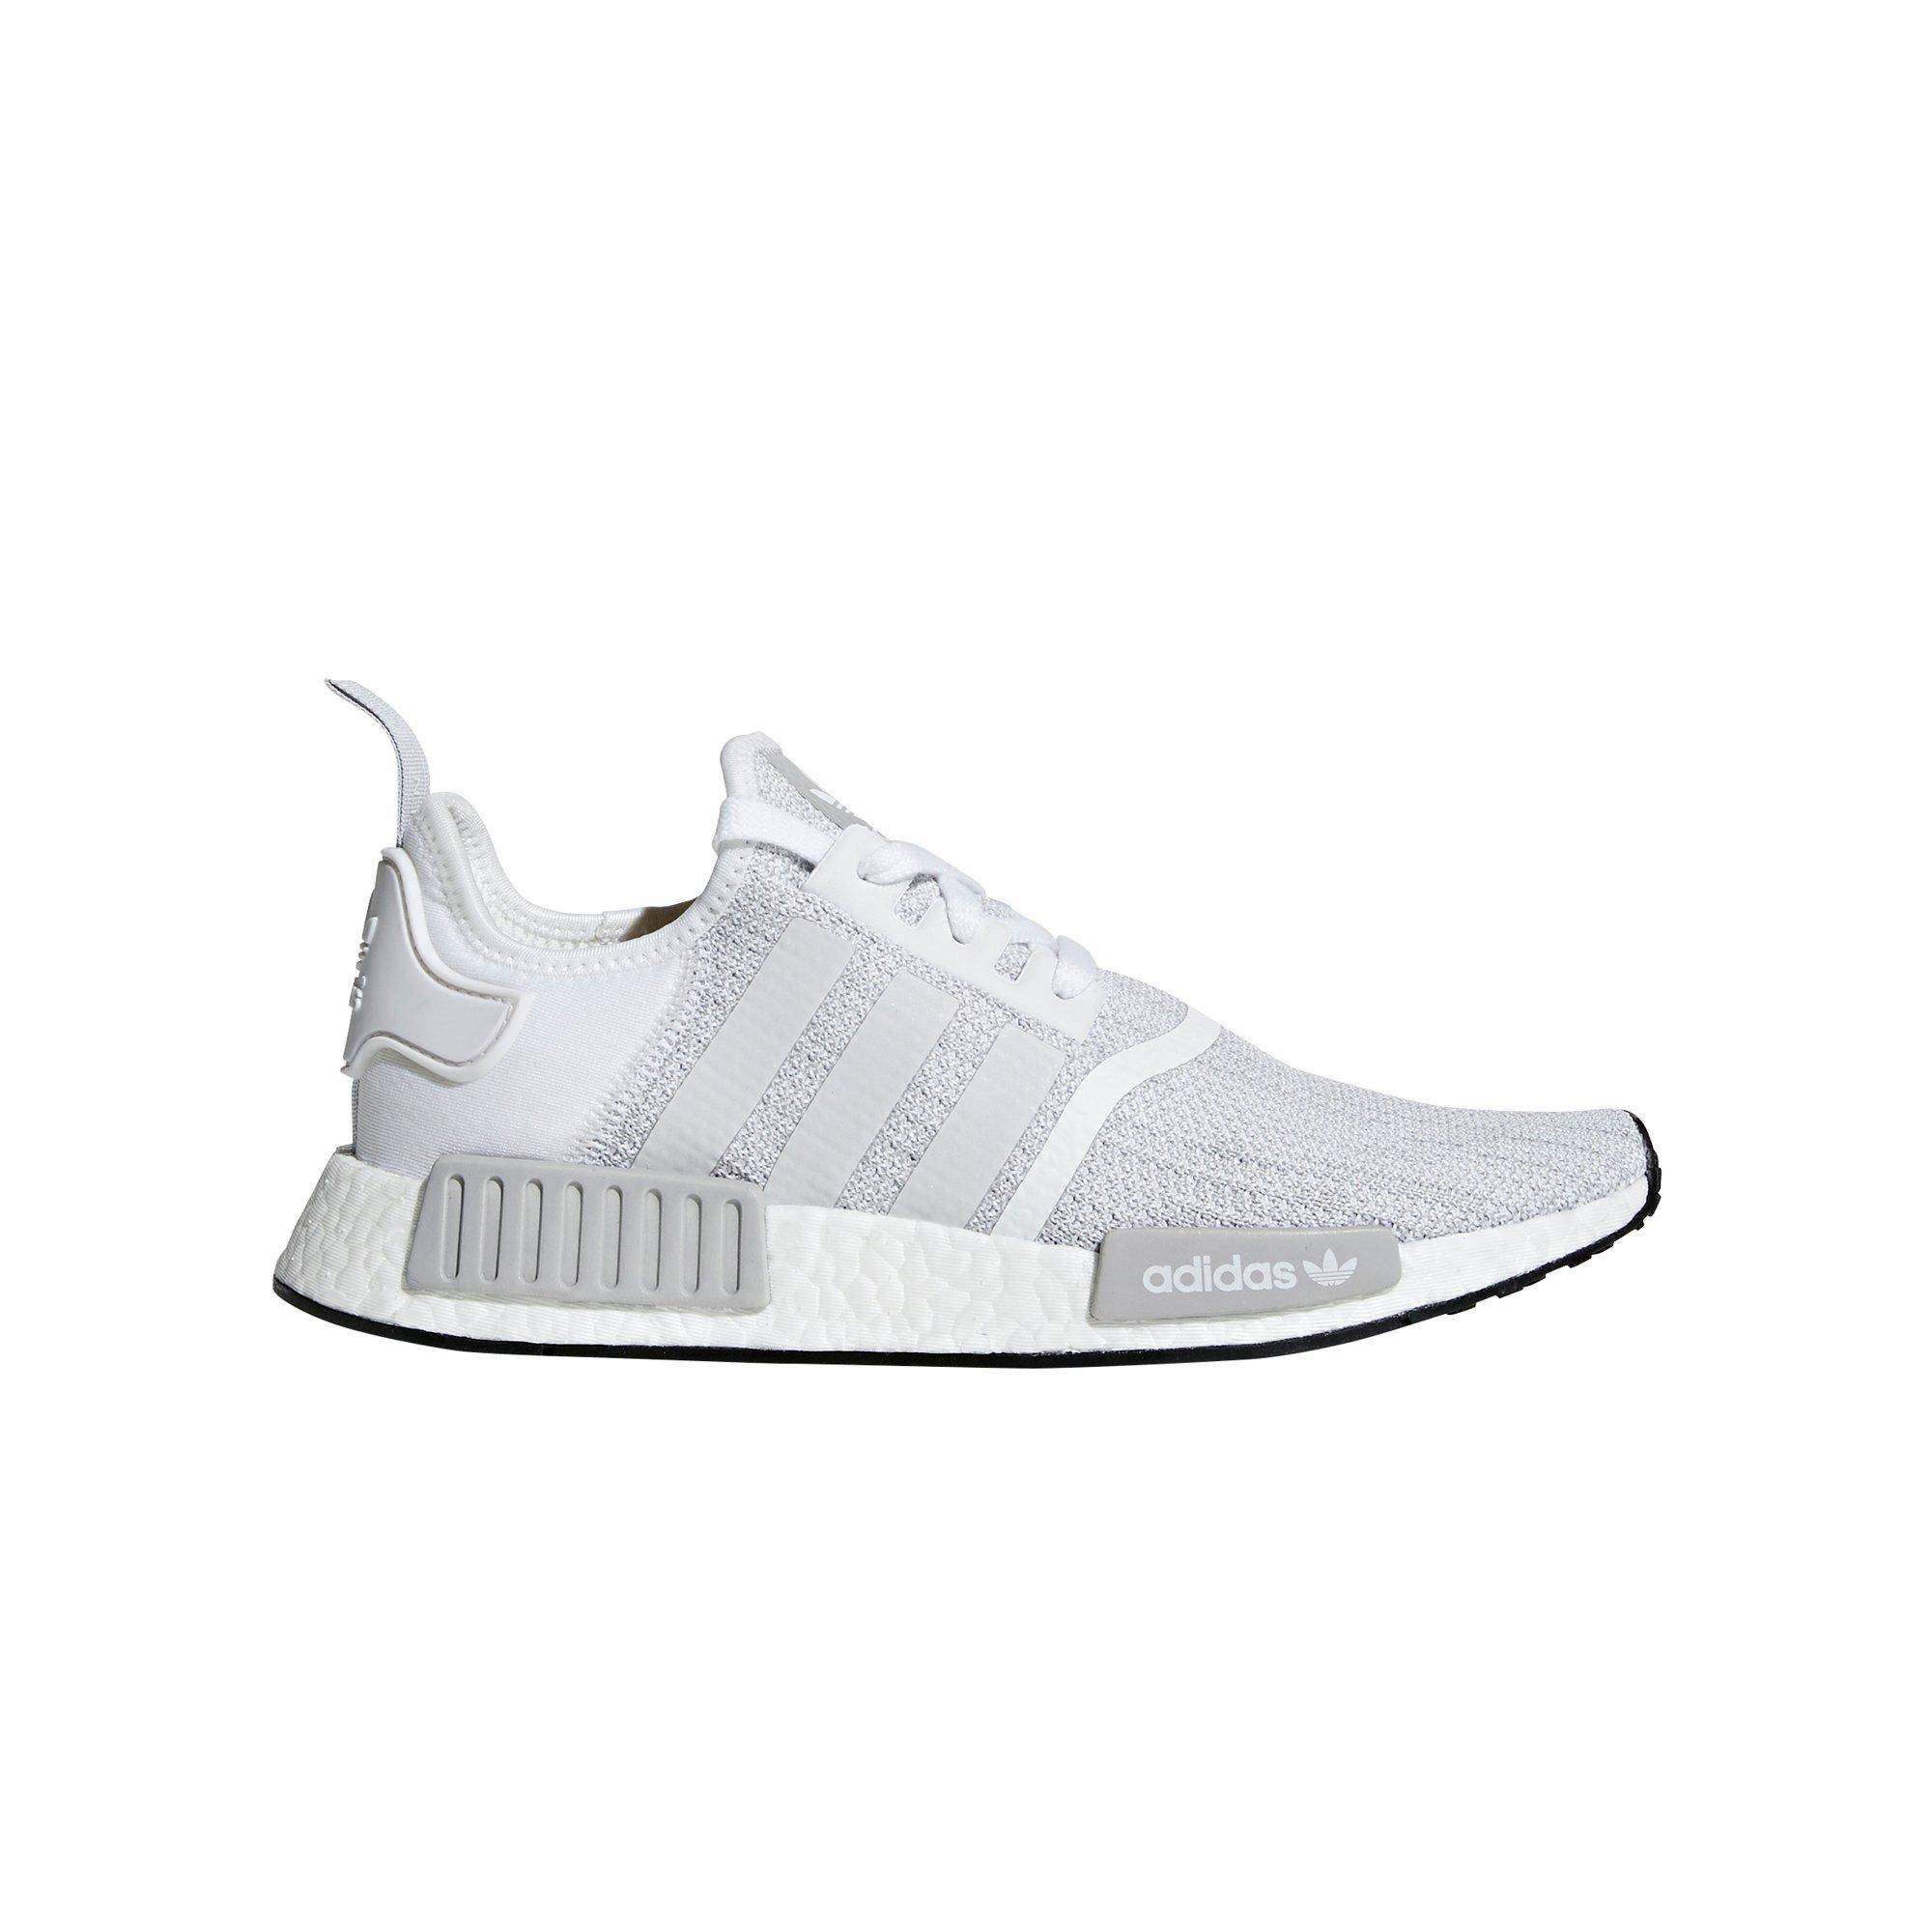 adidas nmd grey and white